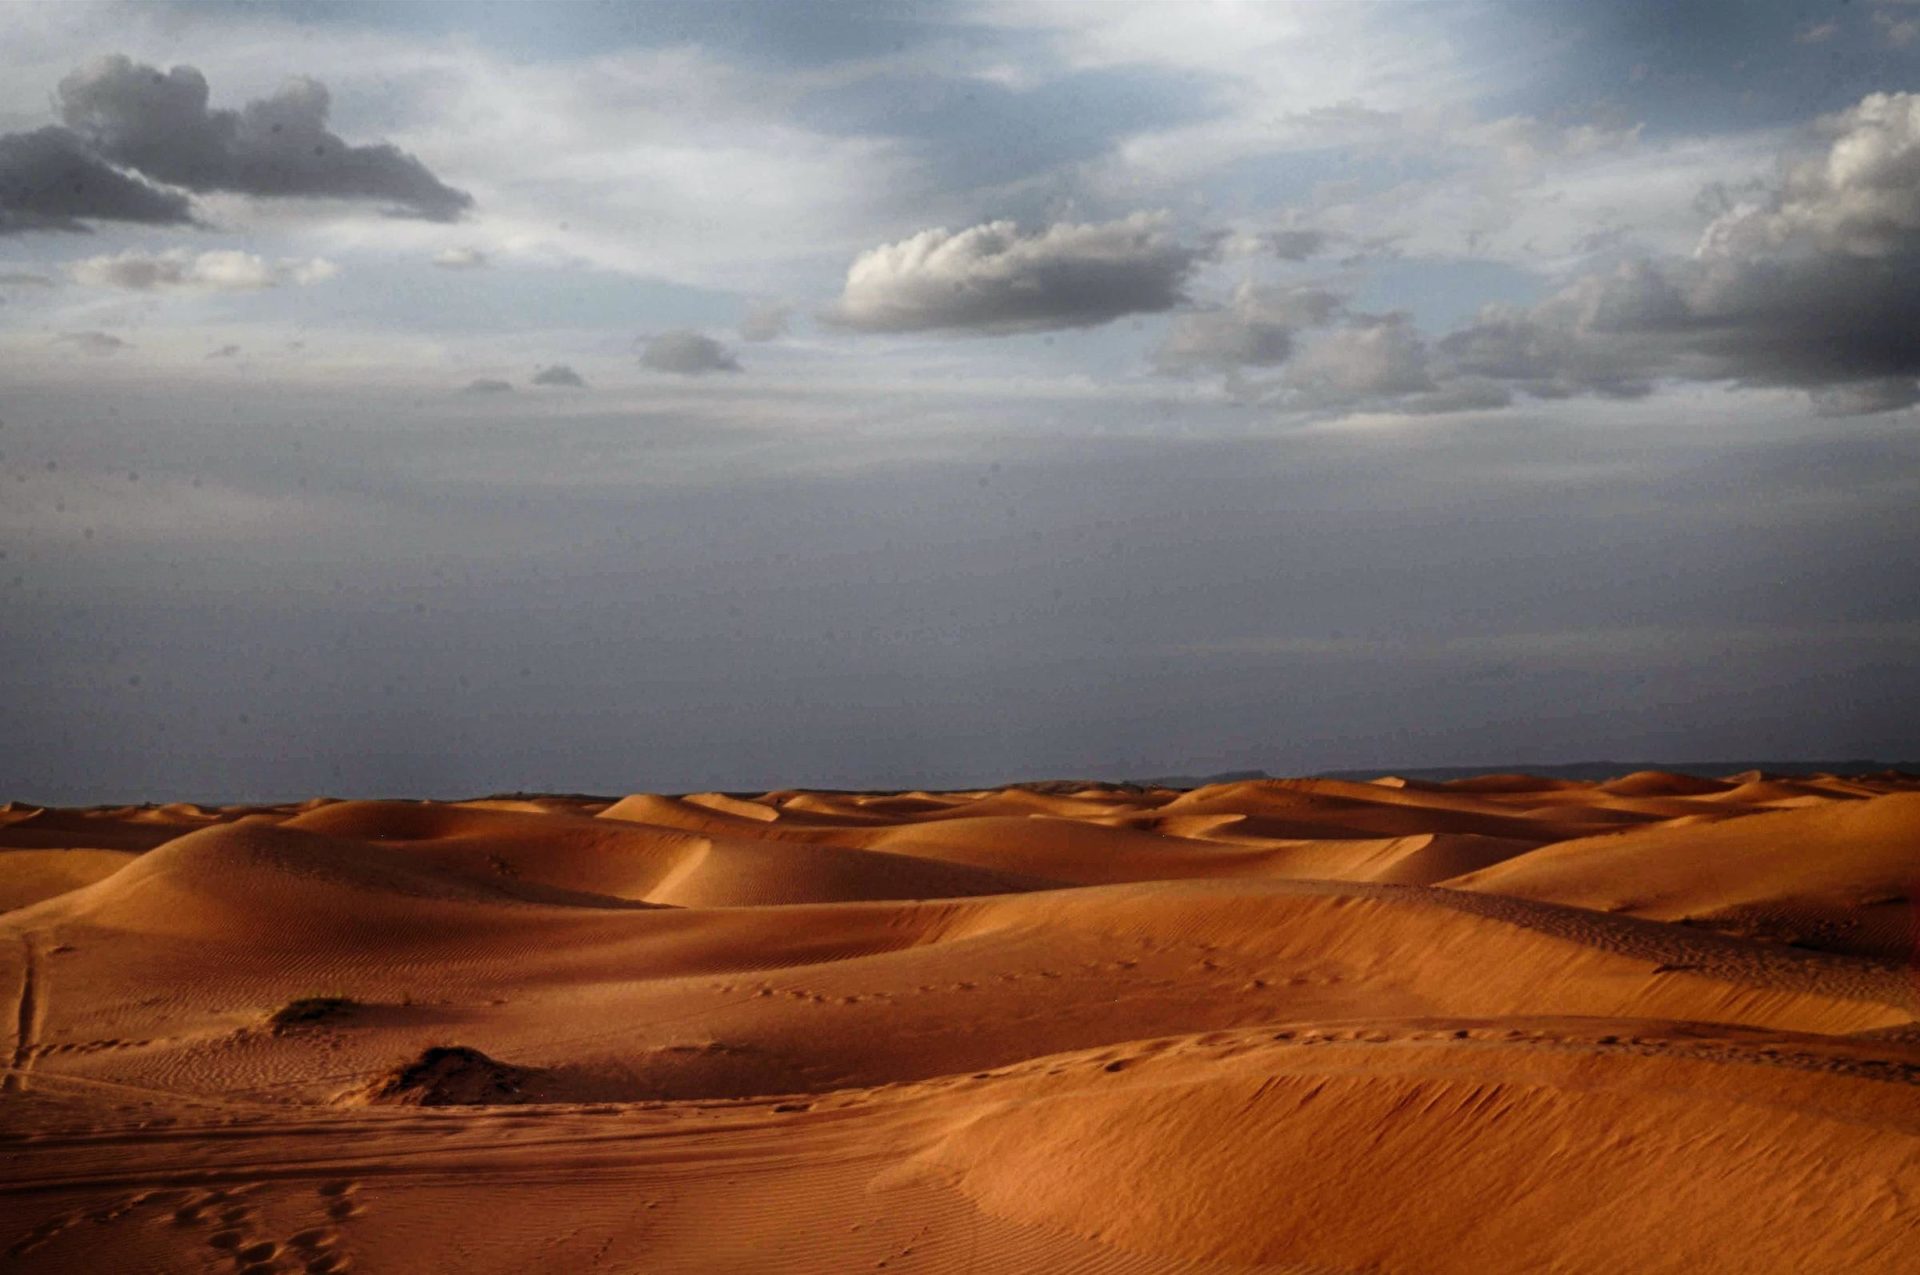 how large is the sahara desert and what does the name sahara mean in arabic language